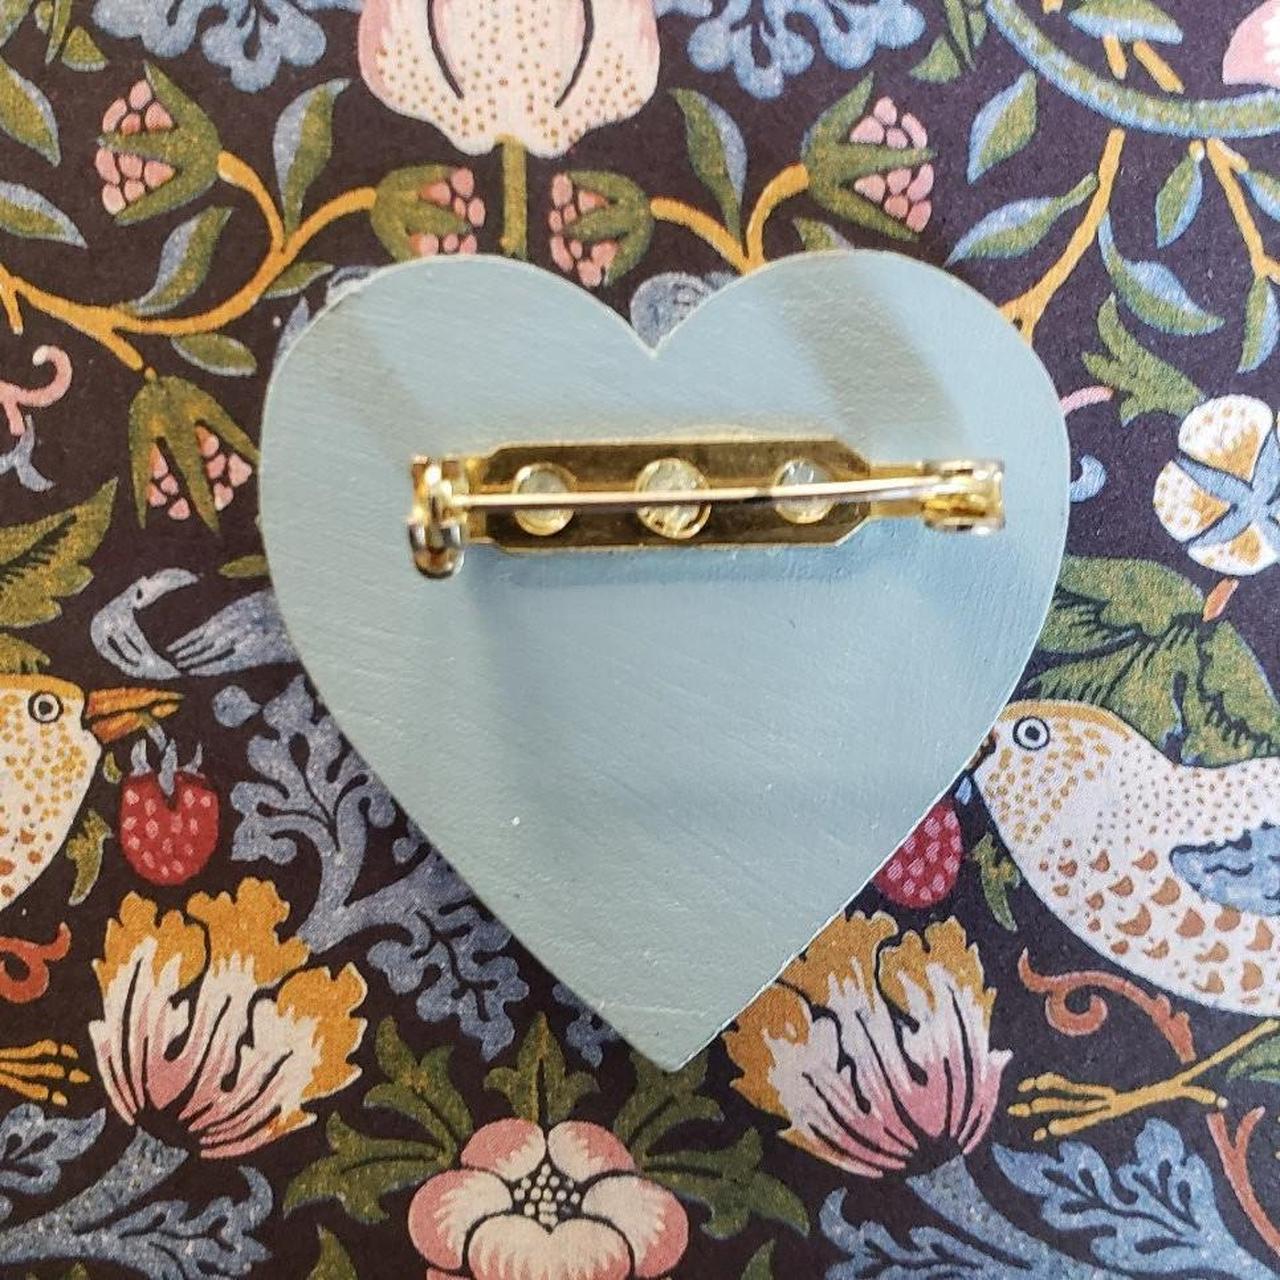 Product Image 3 - Cottagecore Heart Brooch

Lovely little handpainted